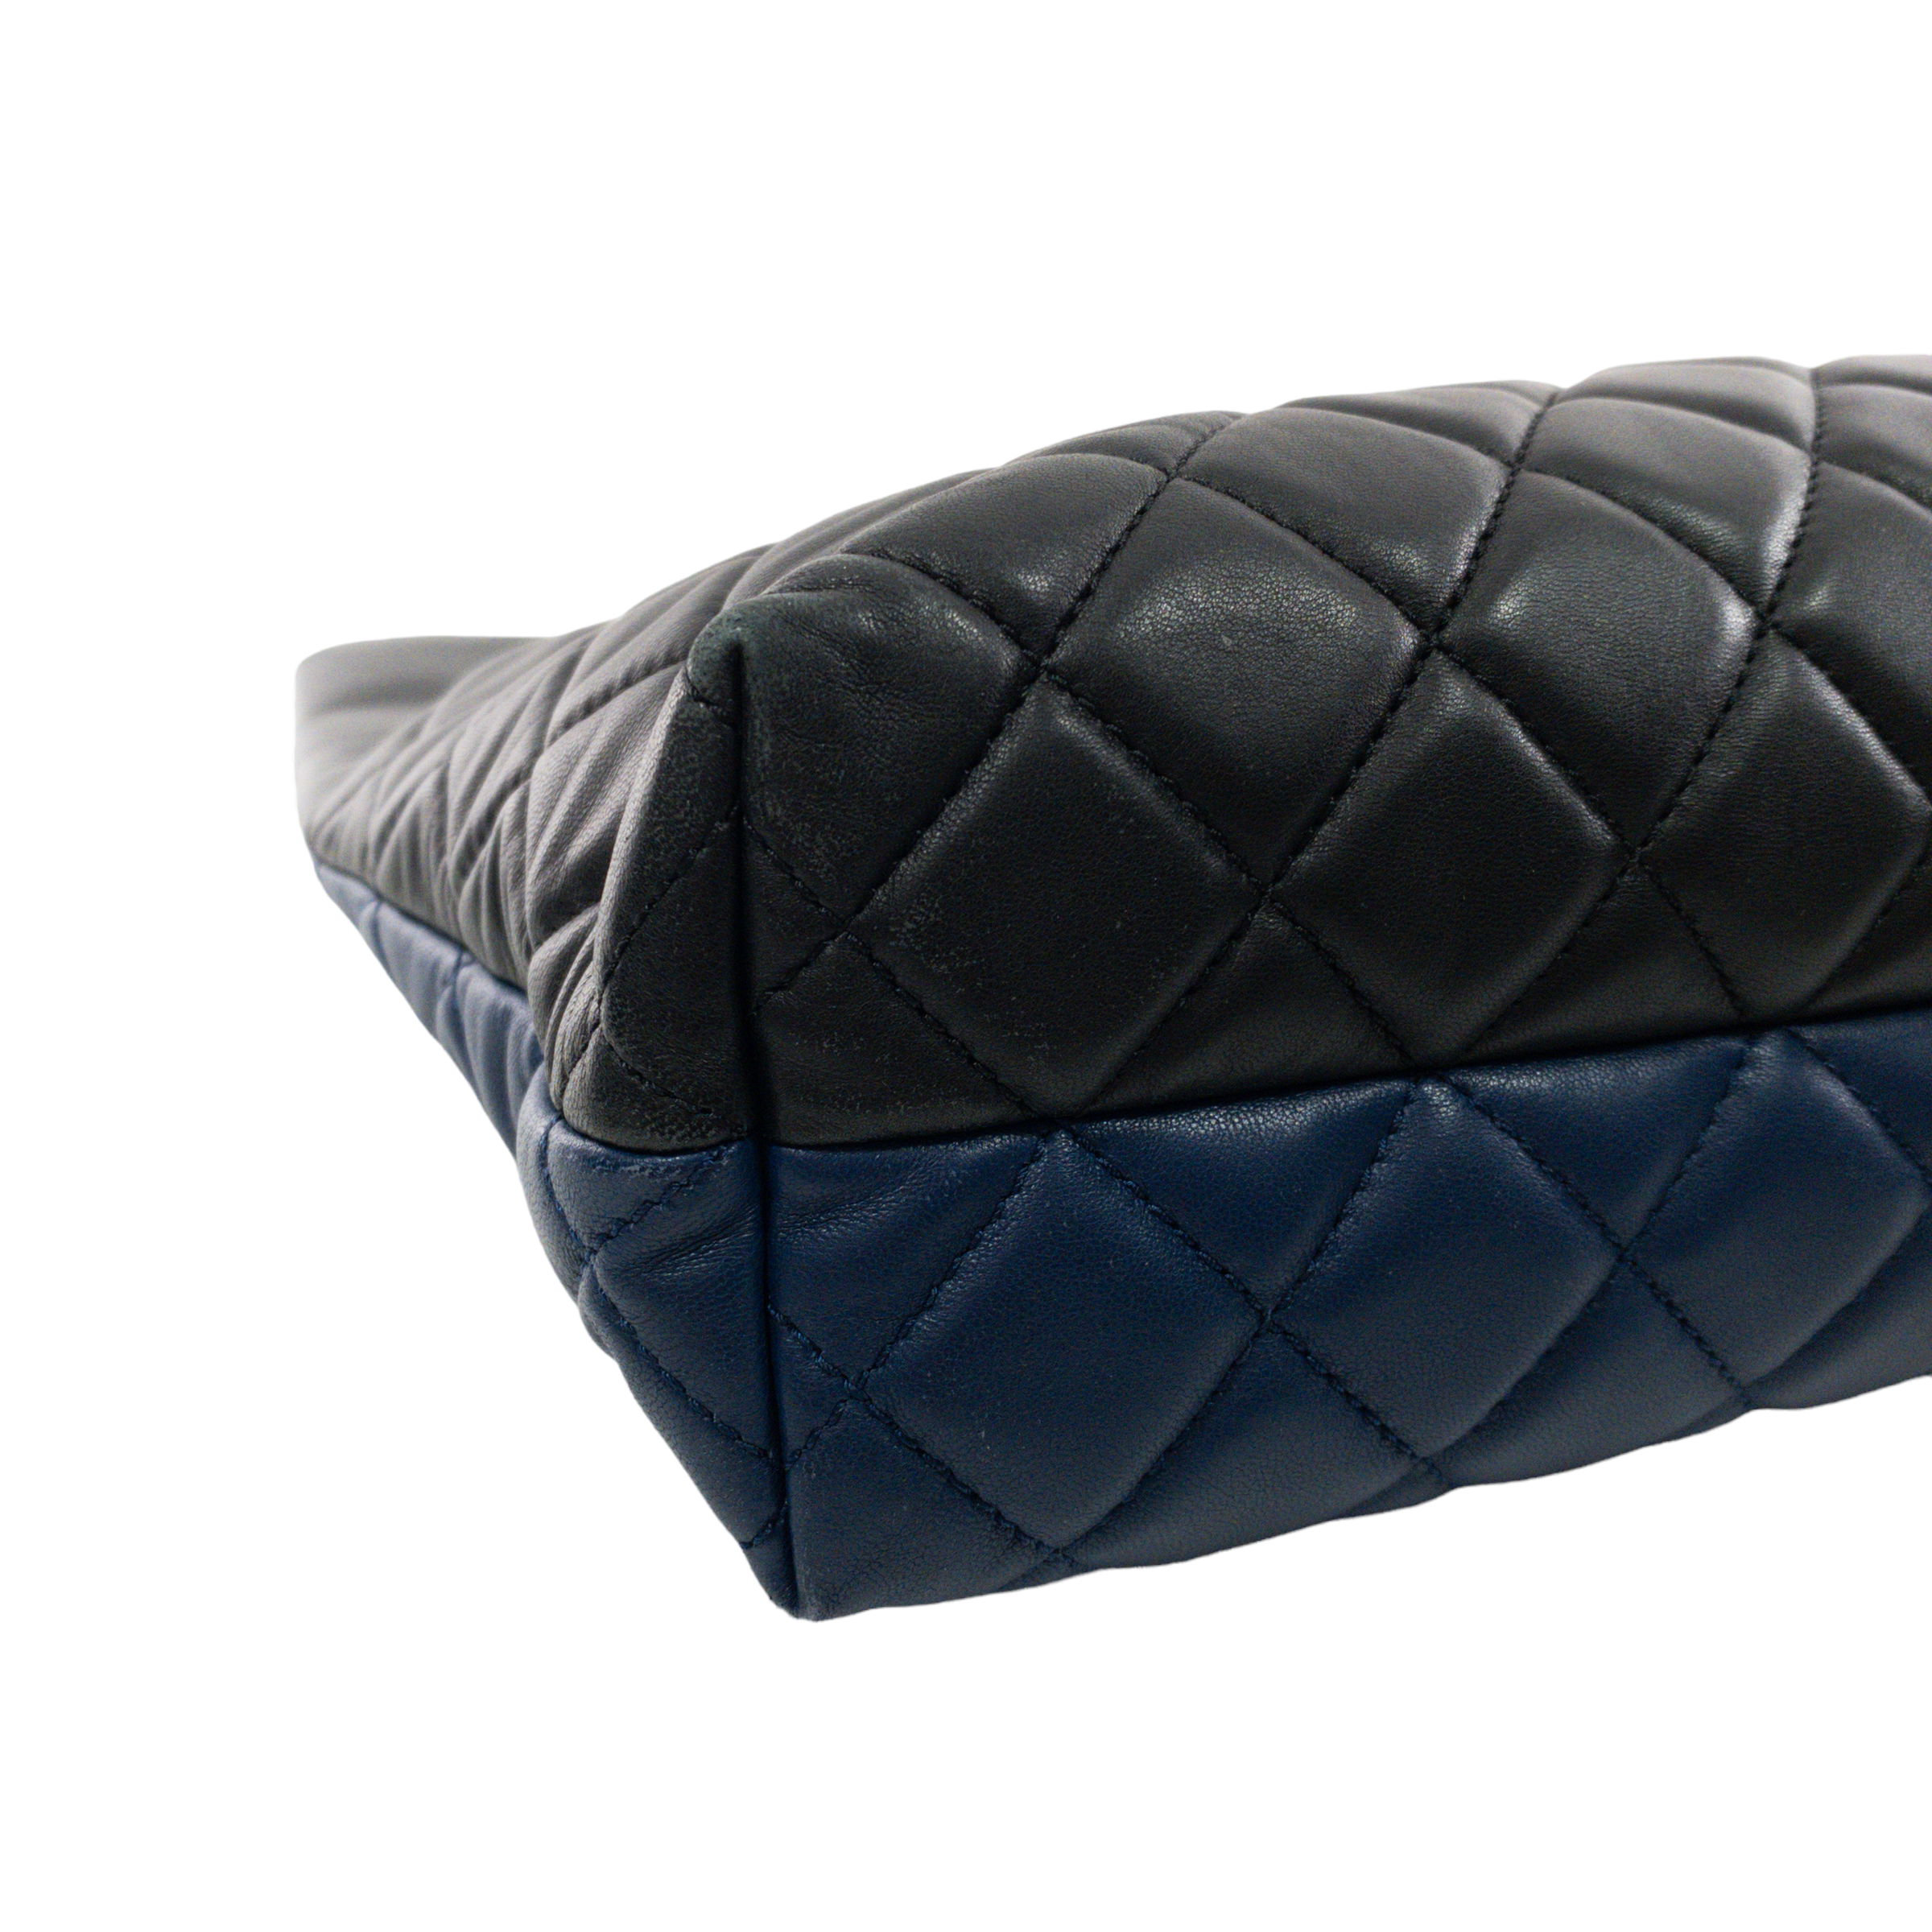 Chanel Navy/Black Quilted Lambskin Shopper Tote RHW